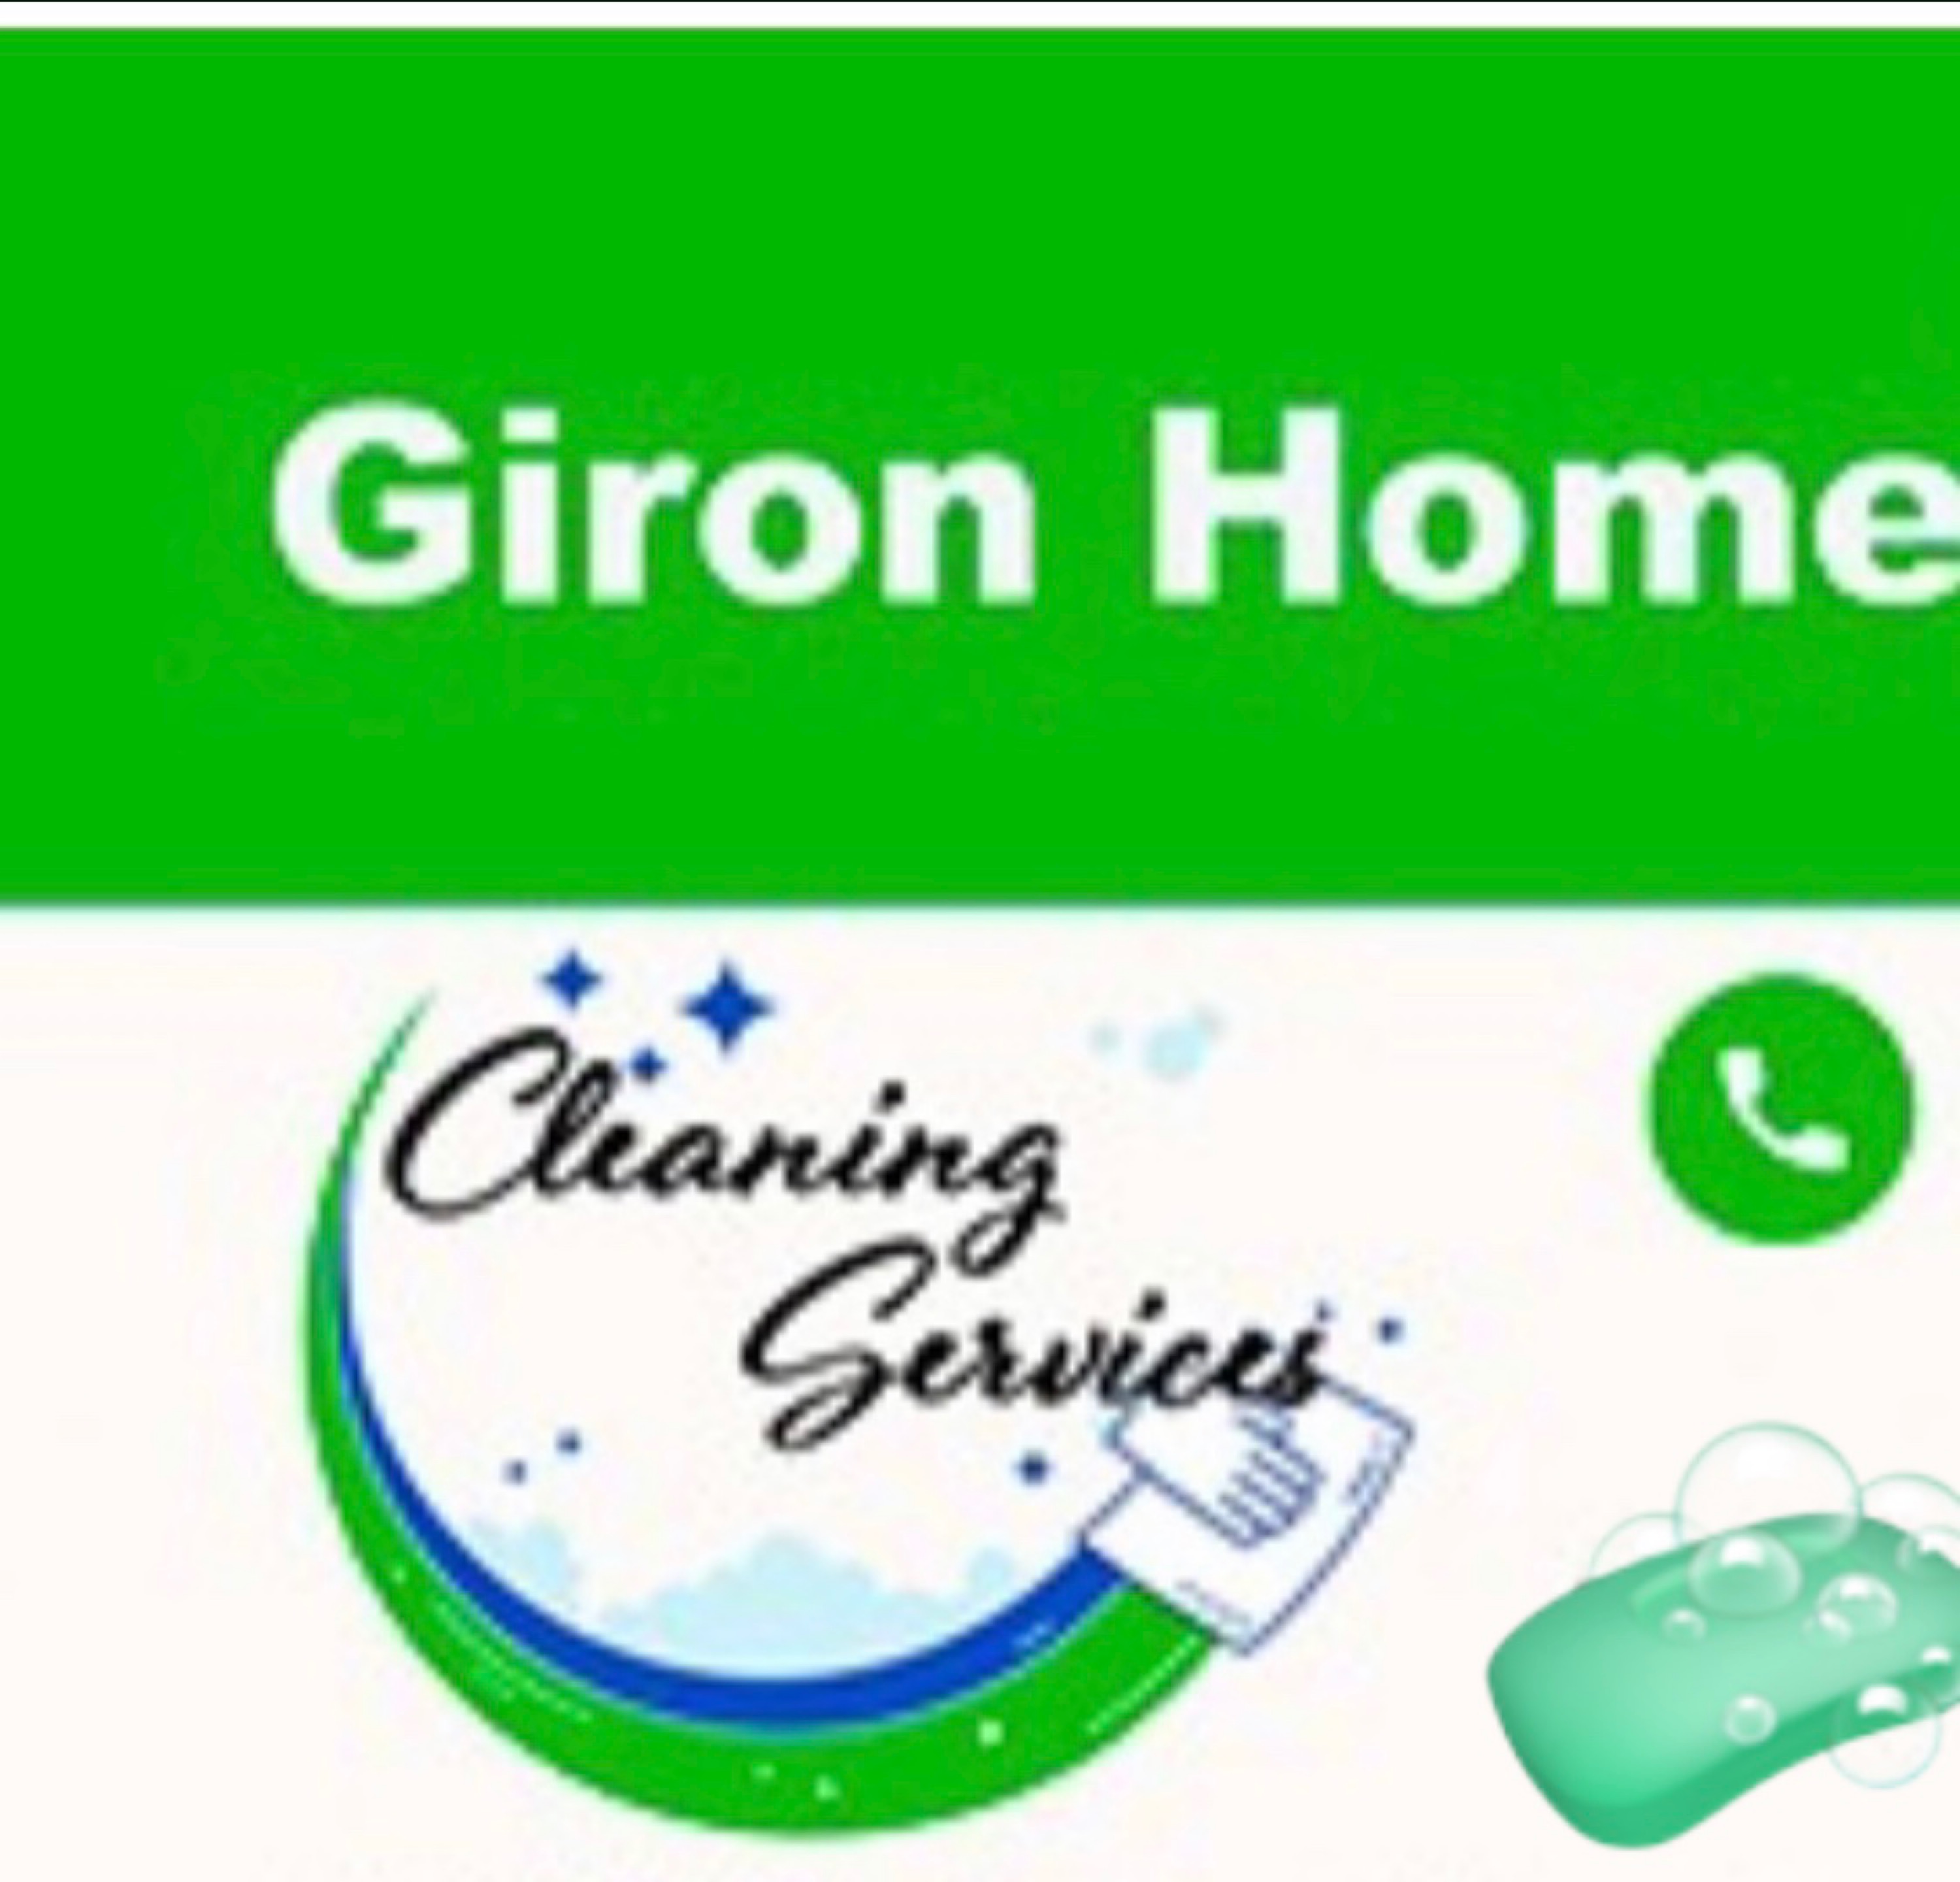 Giron Home Cleaning Services Logo